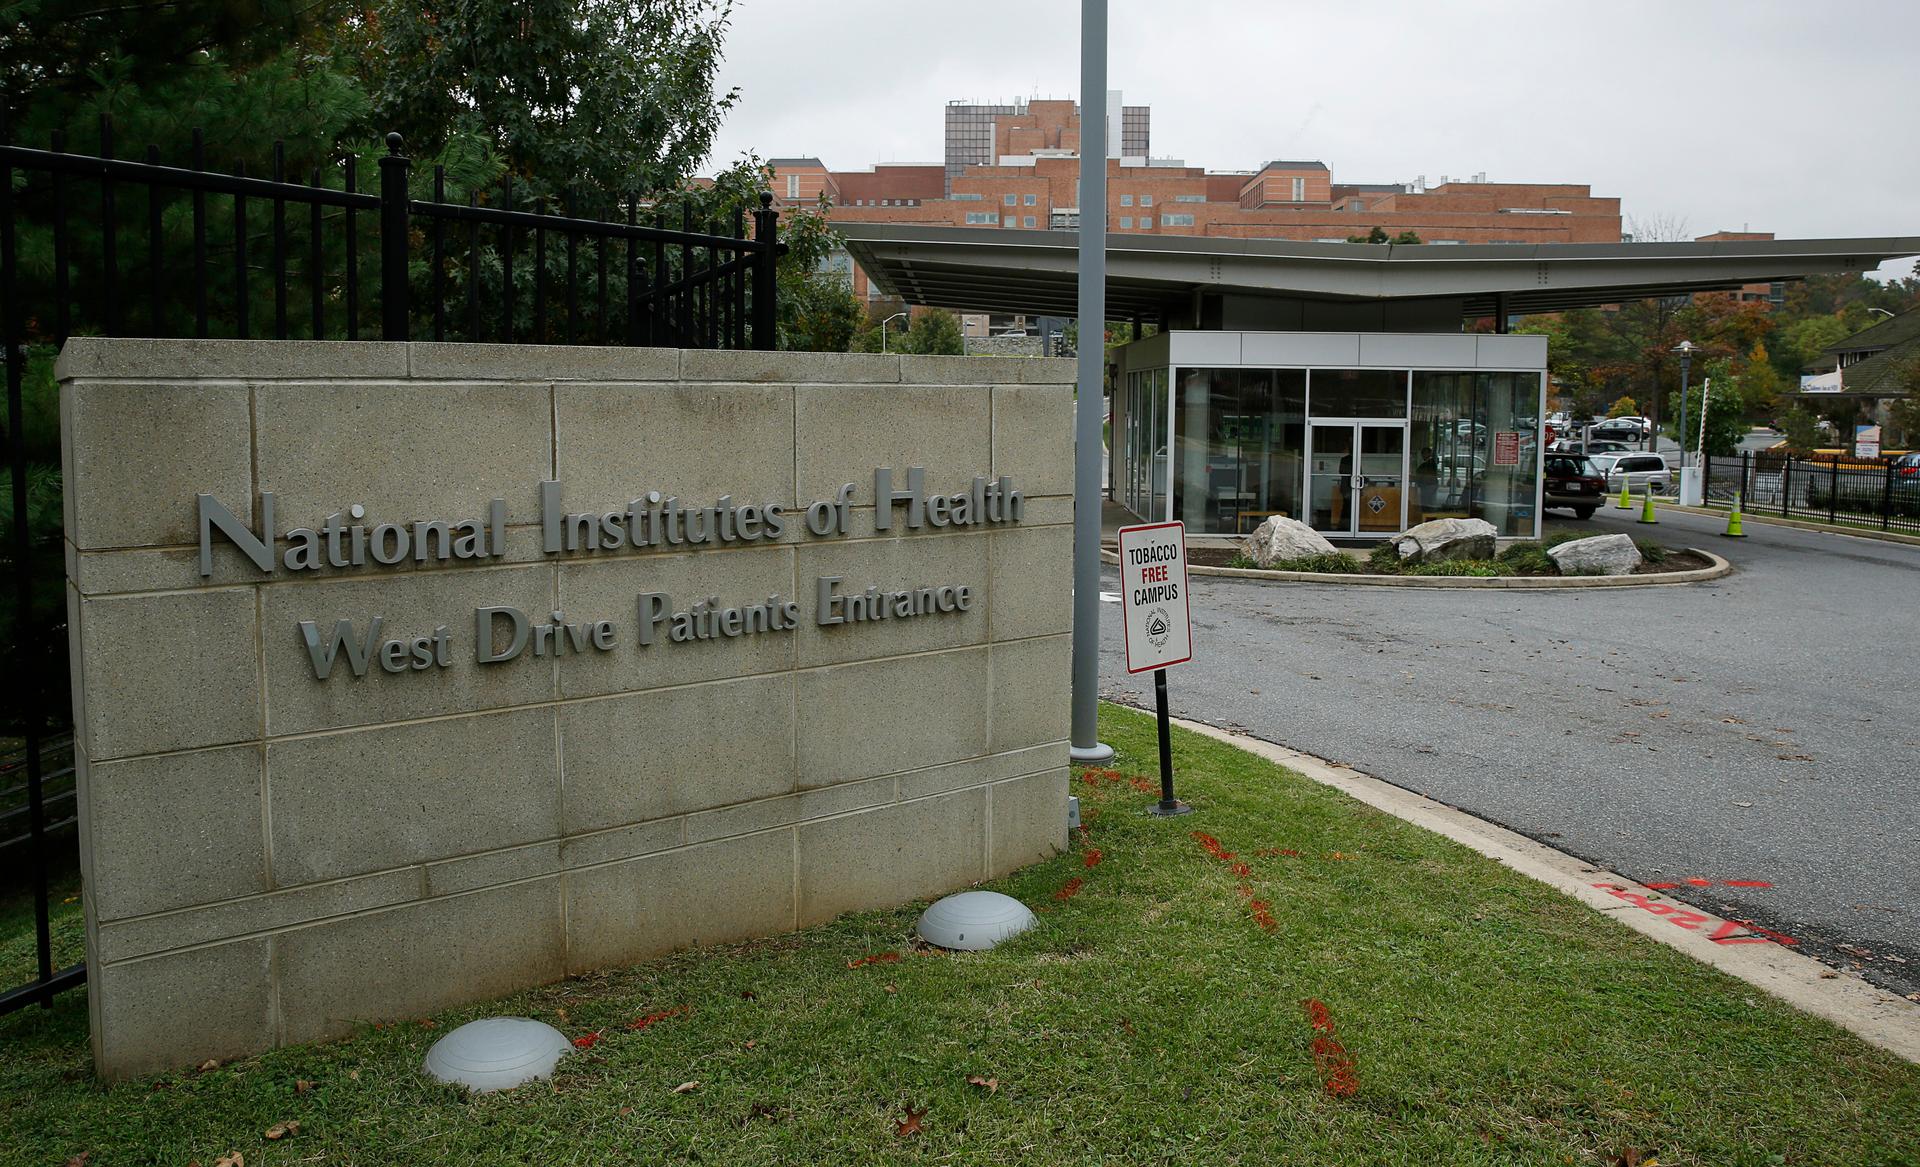 The patient's entrance at the National Institutes of Health is shown in Bethesda, Maryland October 16, 2014.